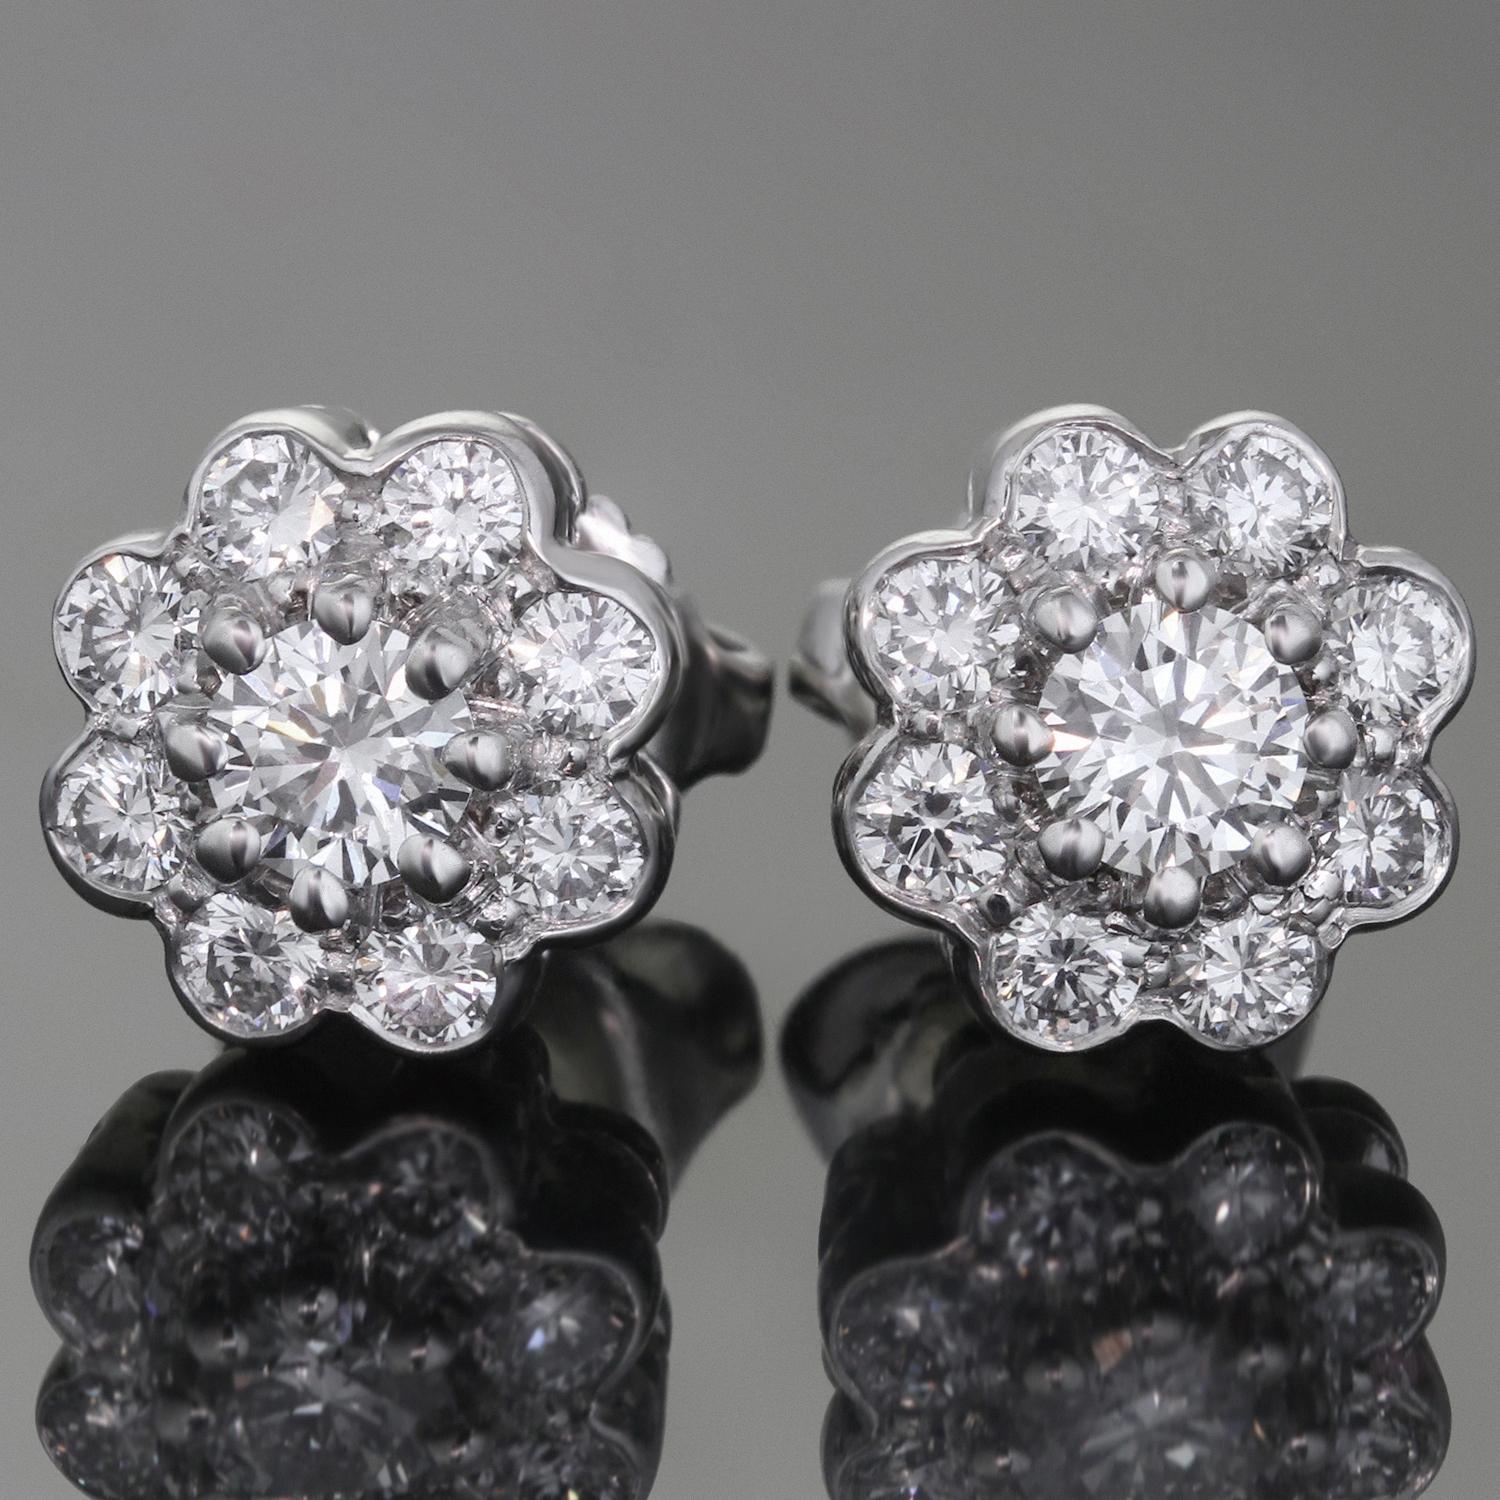 These exquisite Graff stud earrings are crafted in 950 platinum and set with a cluster of brilliant-cut round F-G VVS1-VVS2 diamonds of an estimated 0.88 carats. Made in United Kingdom circa 2010s. Measurements: 0.35